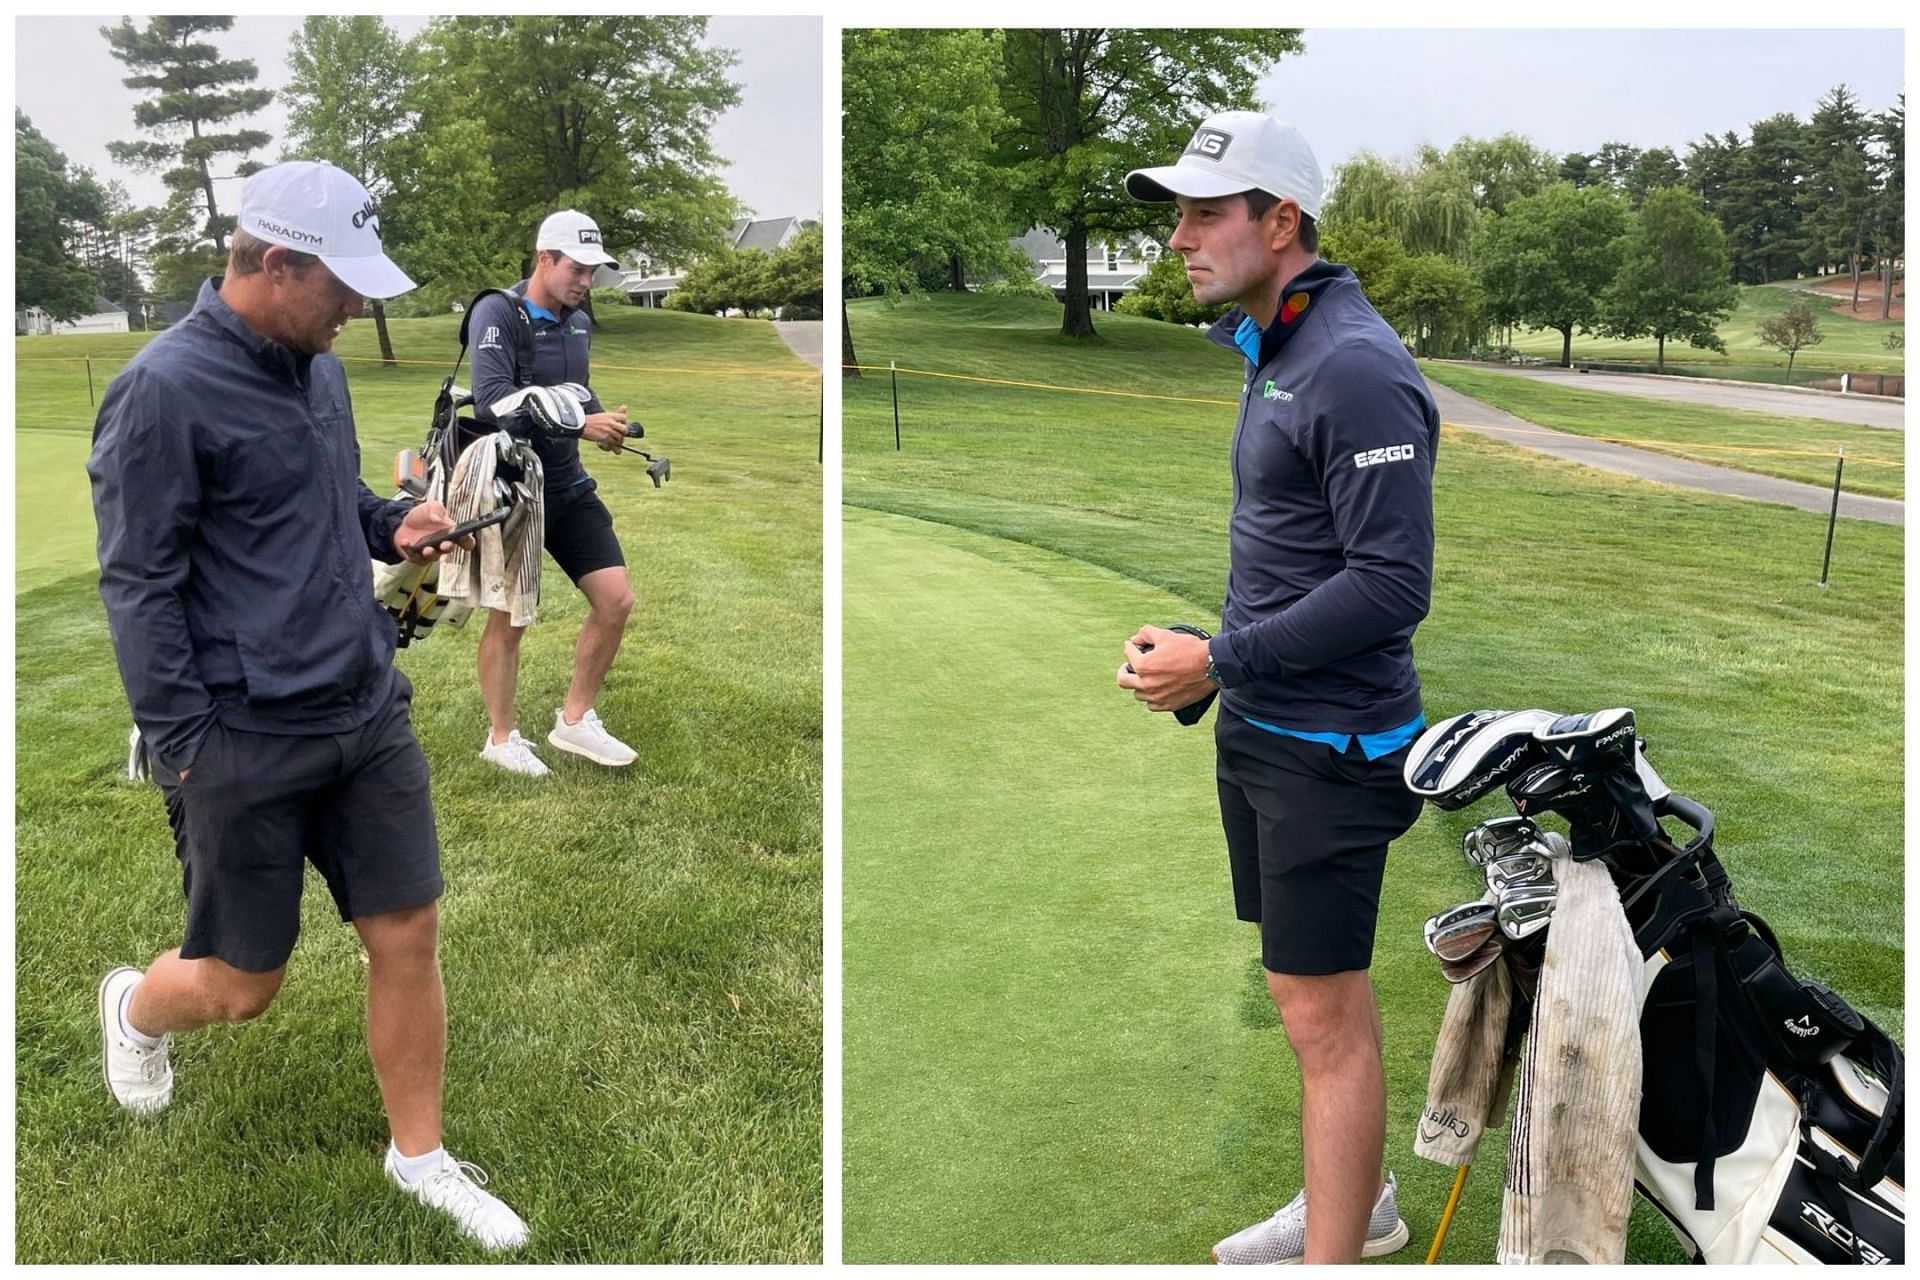 Viktor Hovland was seen caddying for his friend Zach Bauchou at the U.S. Open qualifying